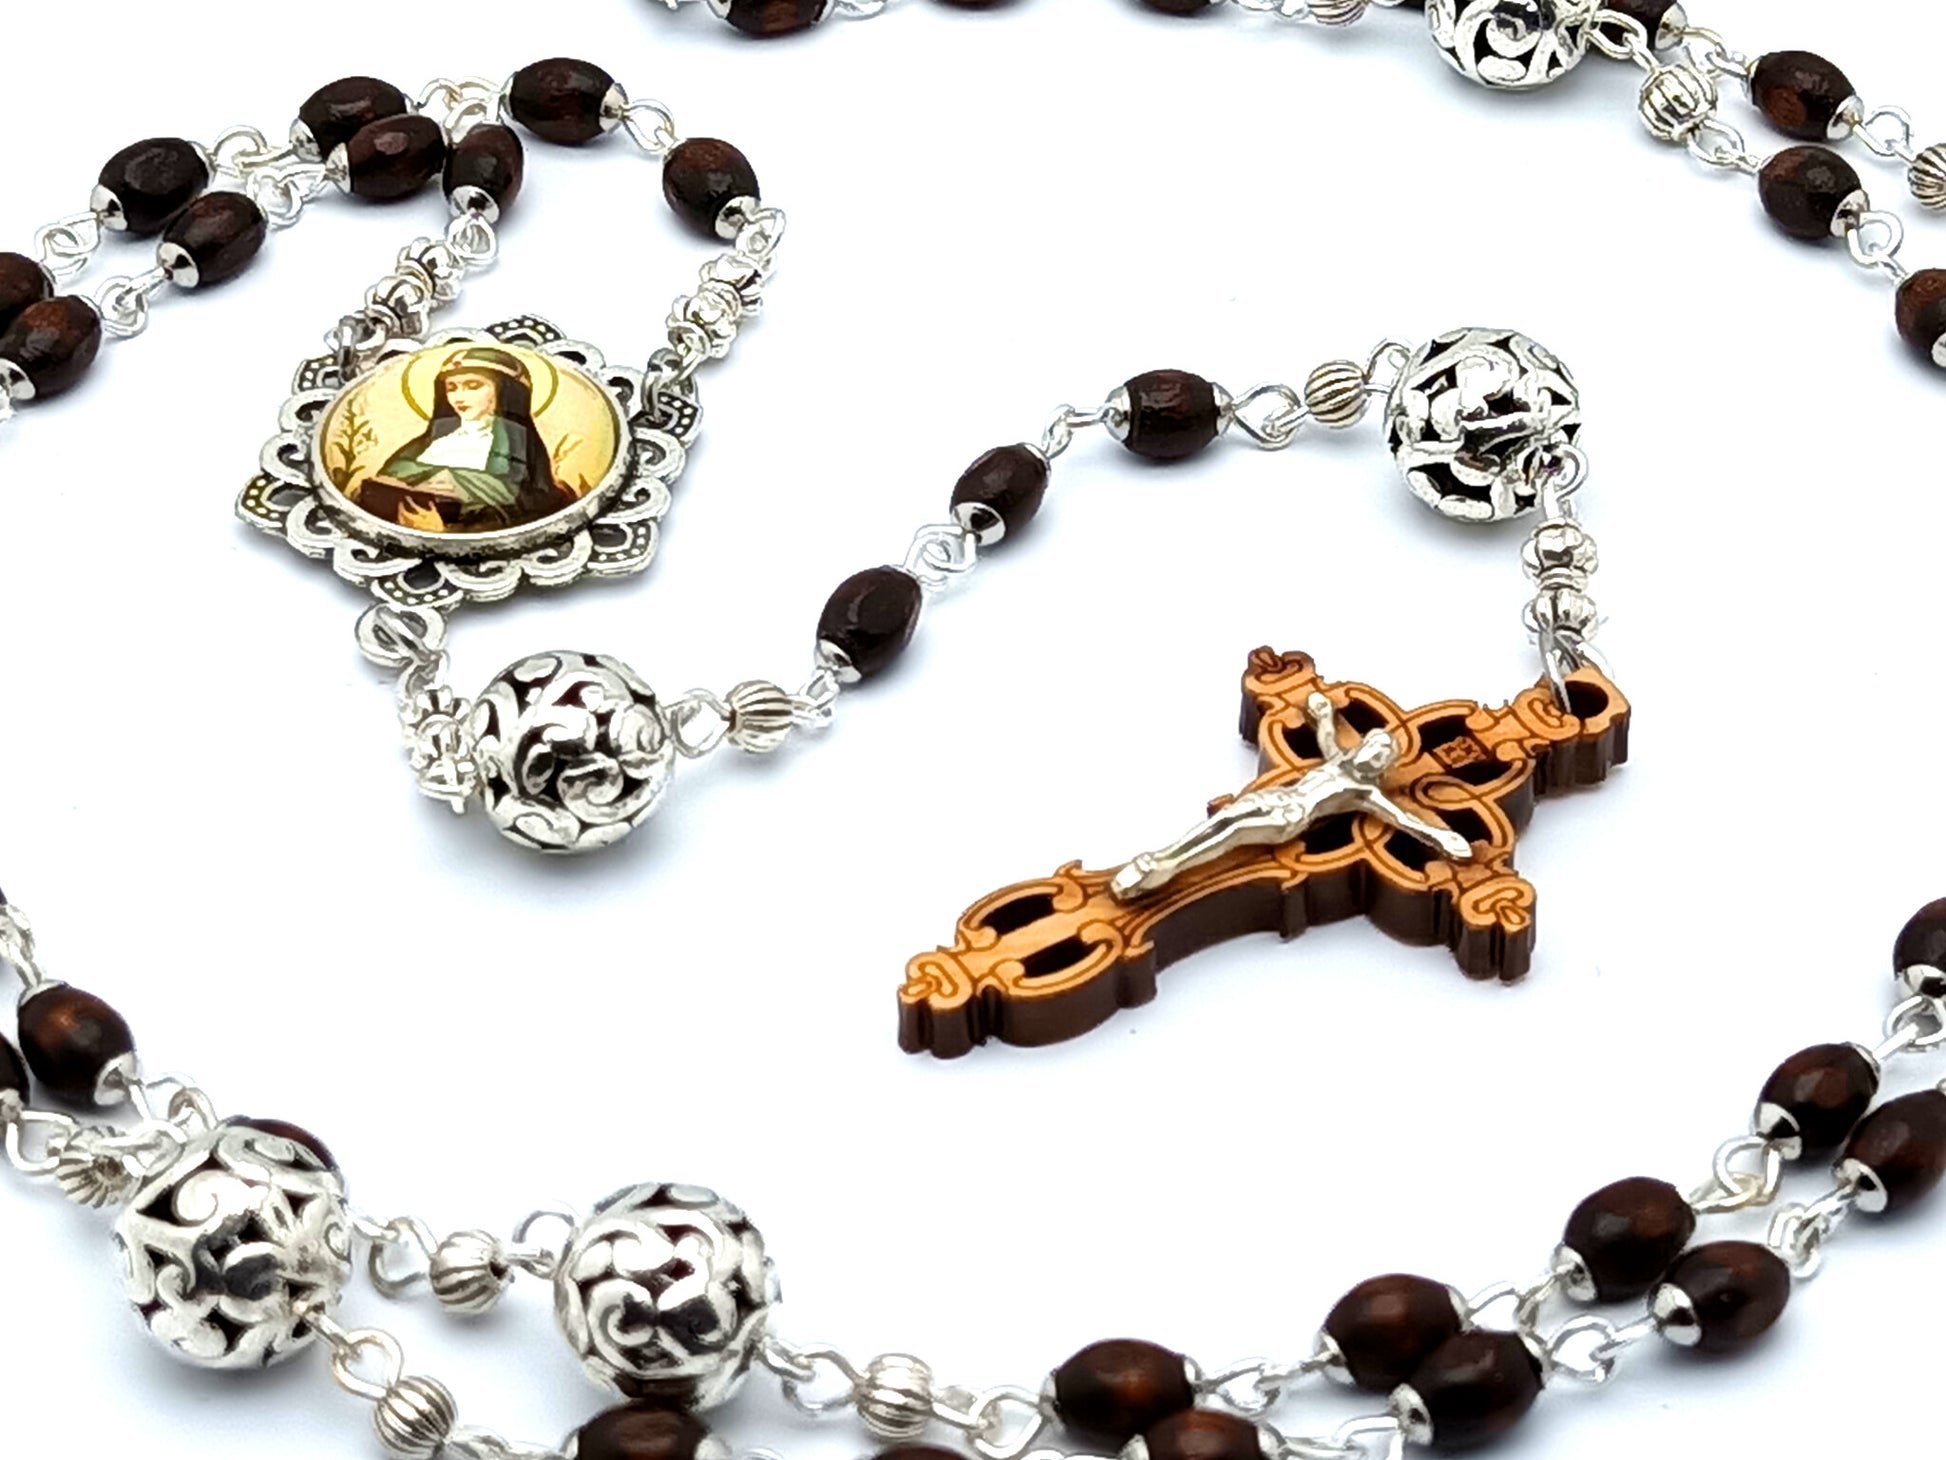 Saint Bridget of Sweden unique rosary beads with wooden beads and olive wood laser cut crucifix and silver corpus.